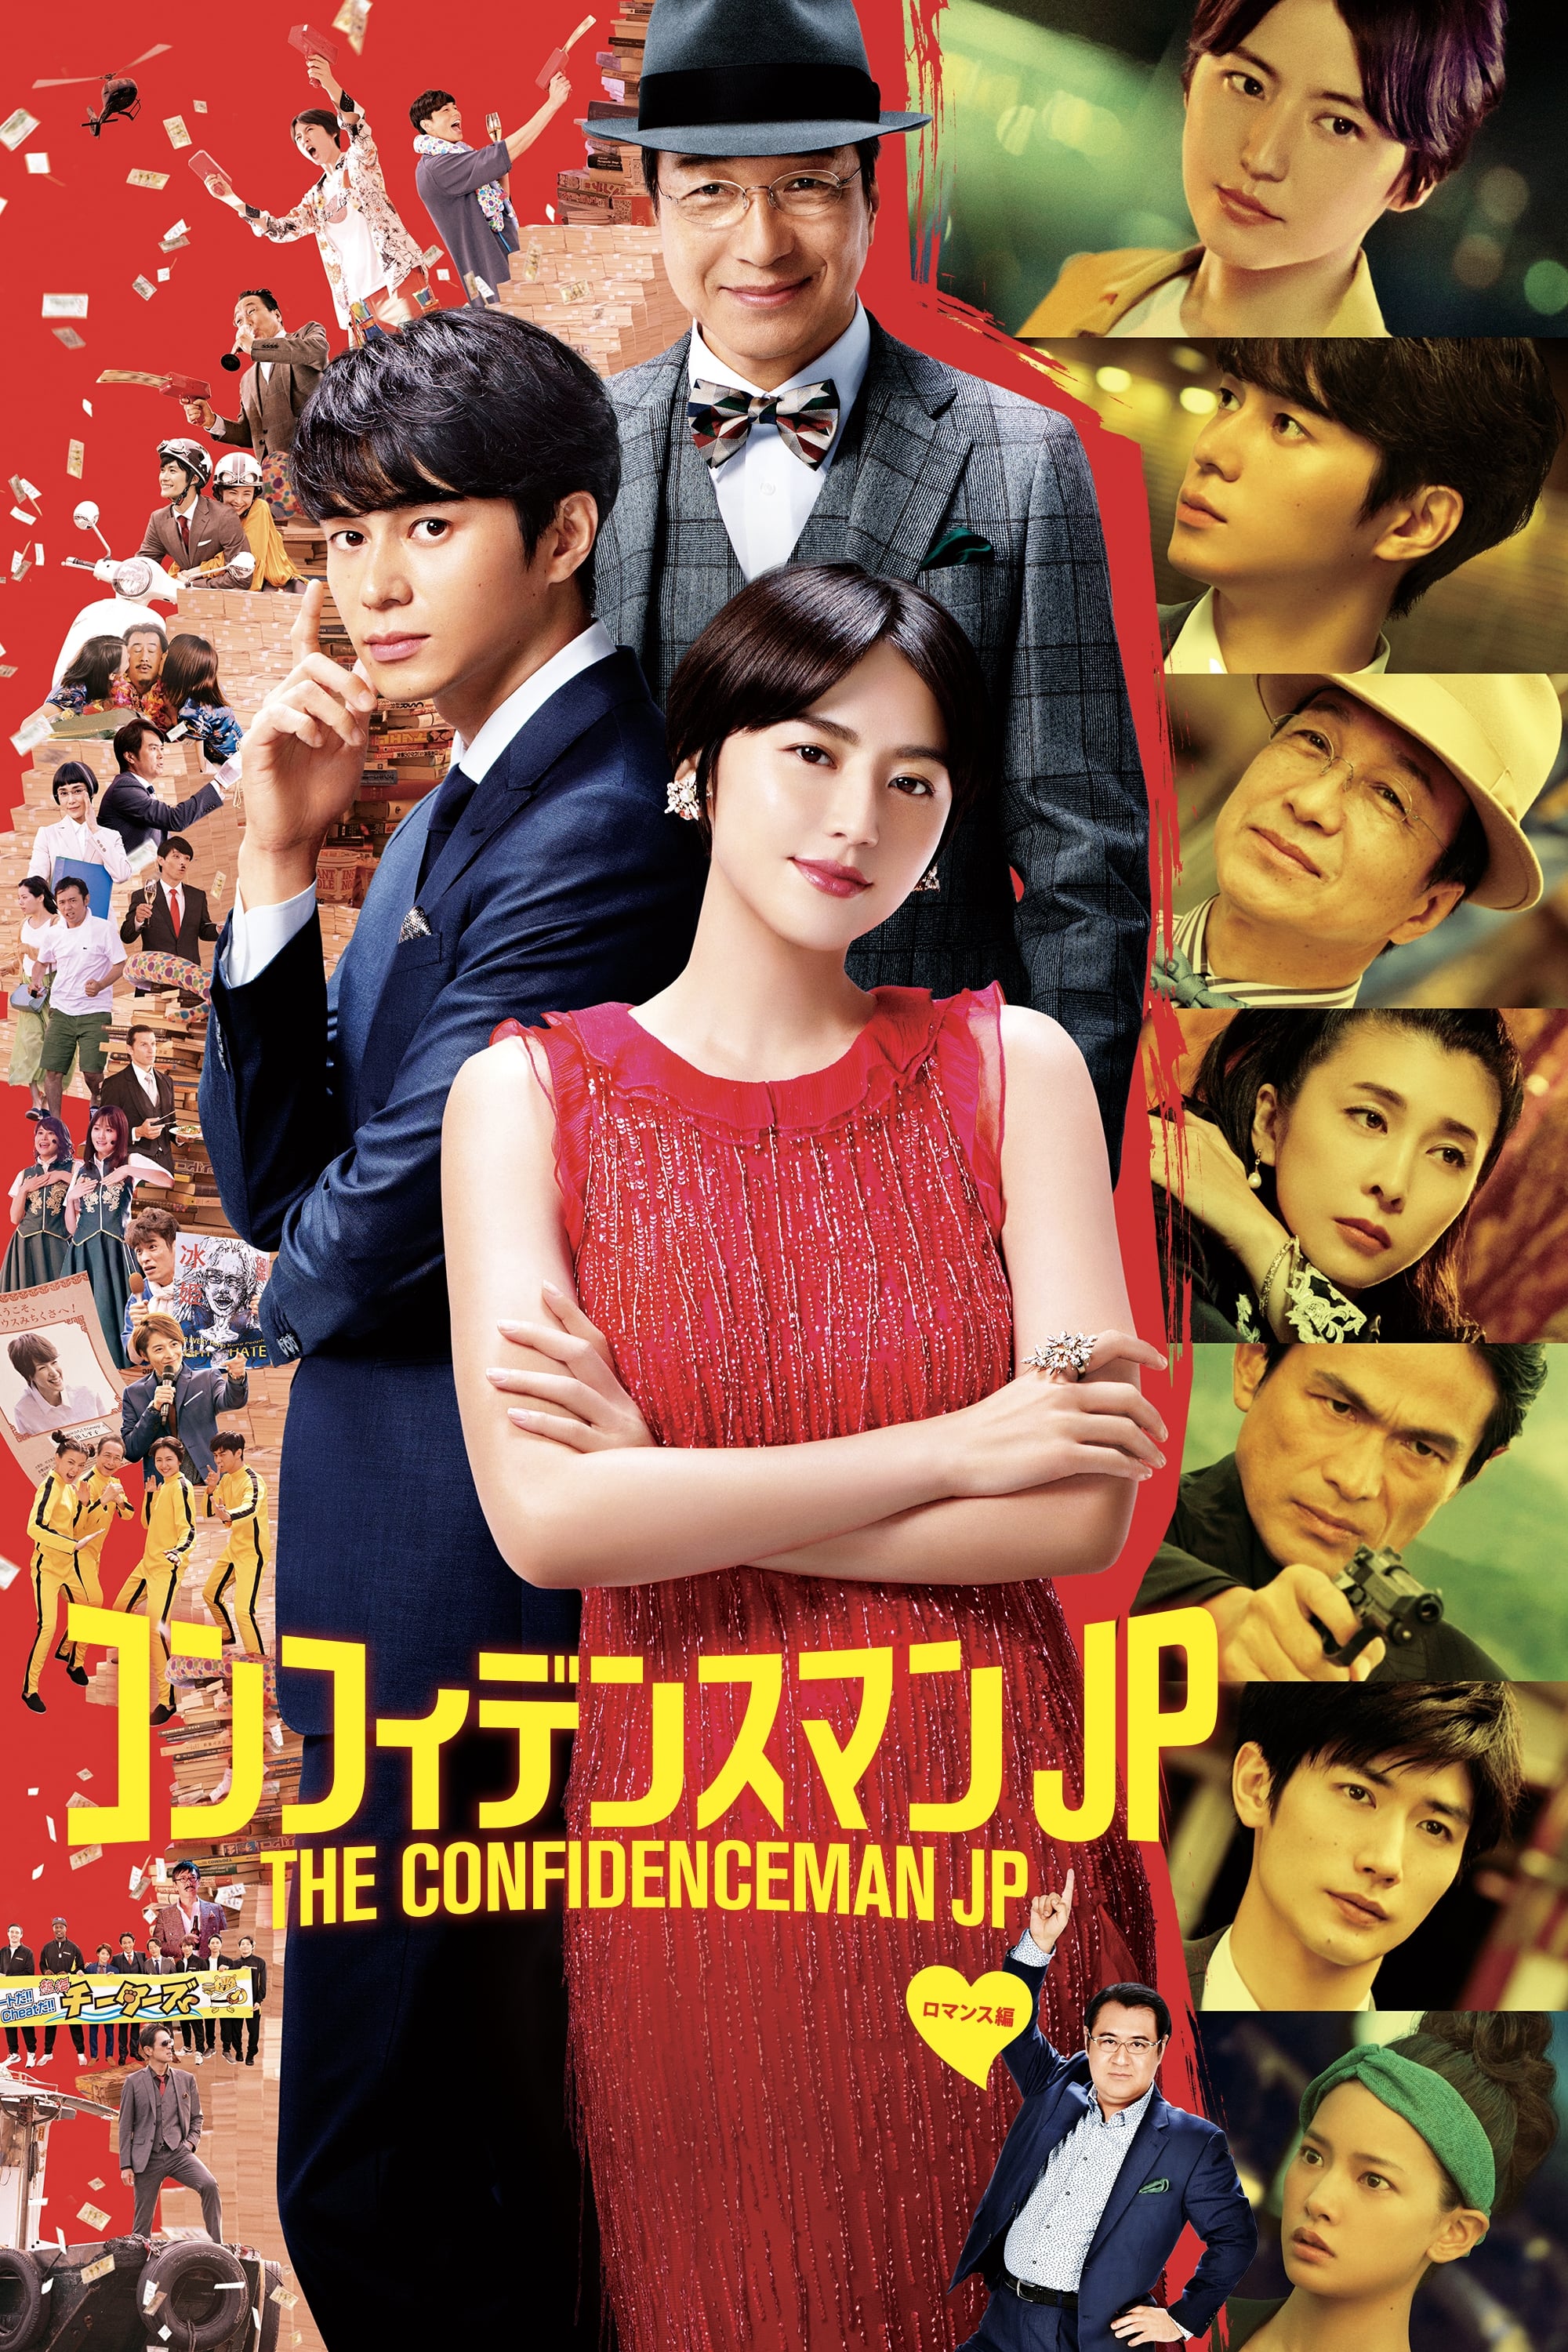 The Confidence Man JP - The Movie - (2019)